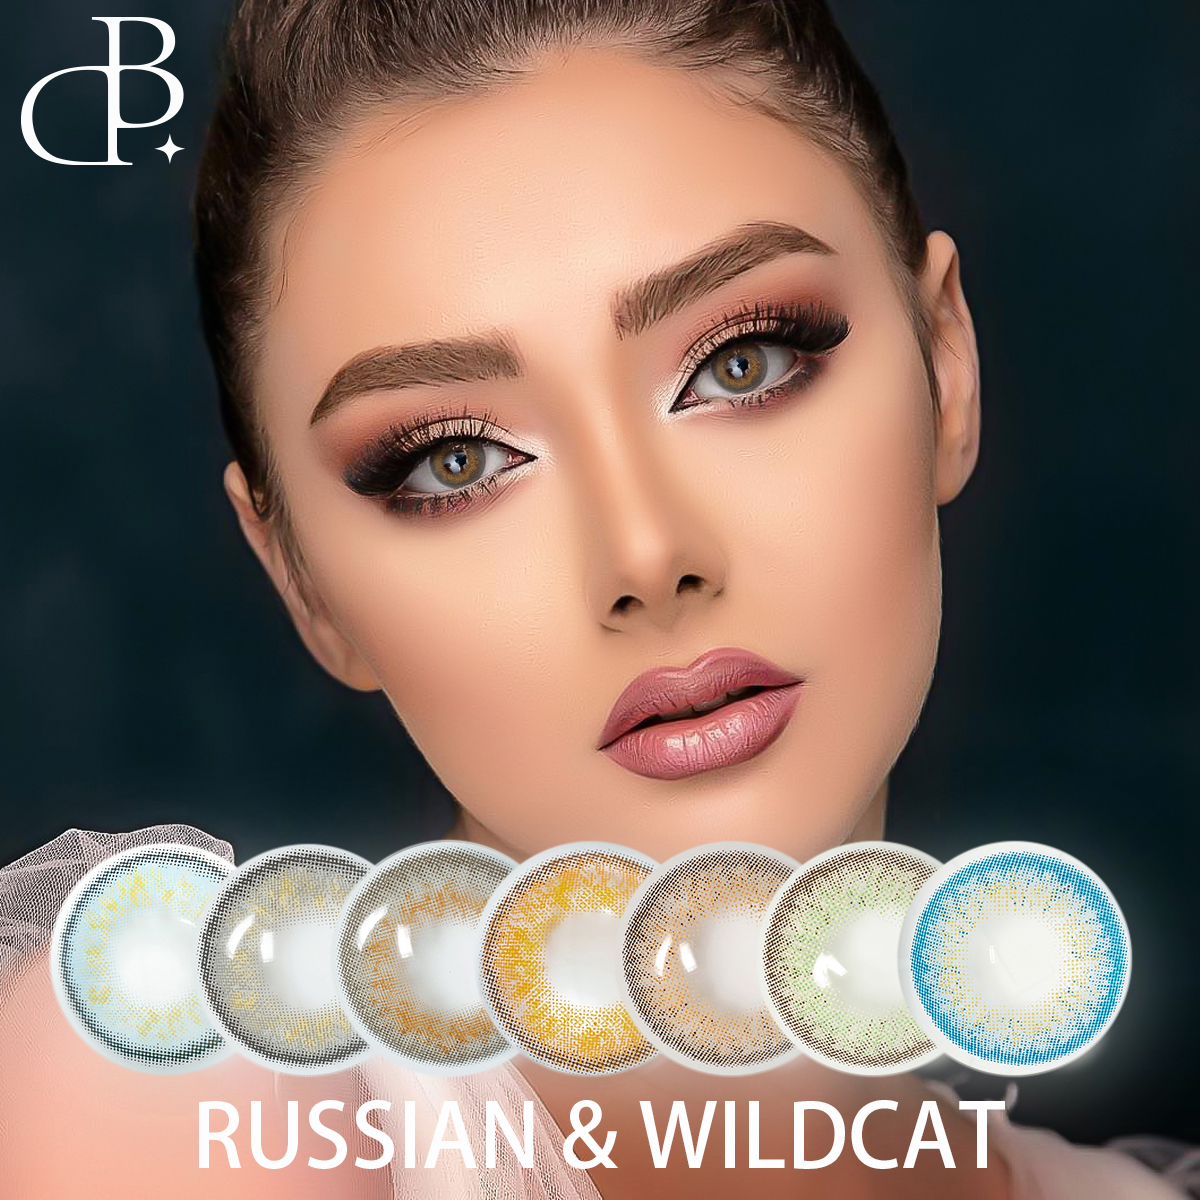 https://www.dblenses.com/russianwild-cat-natural-colored-eye-lenses-wholesale-soft-colored-contact-lenses-prescription-contact-lenses-free-shipping-product/